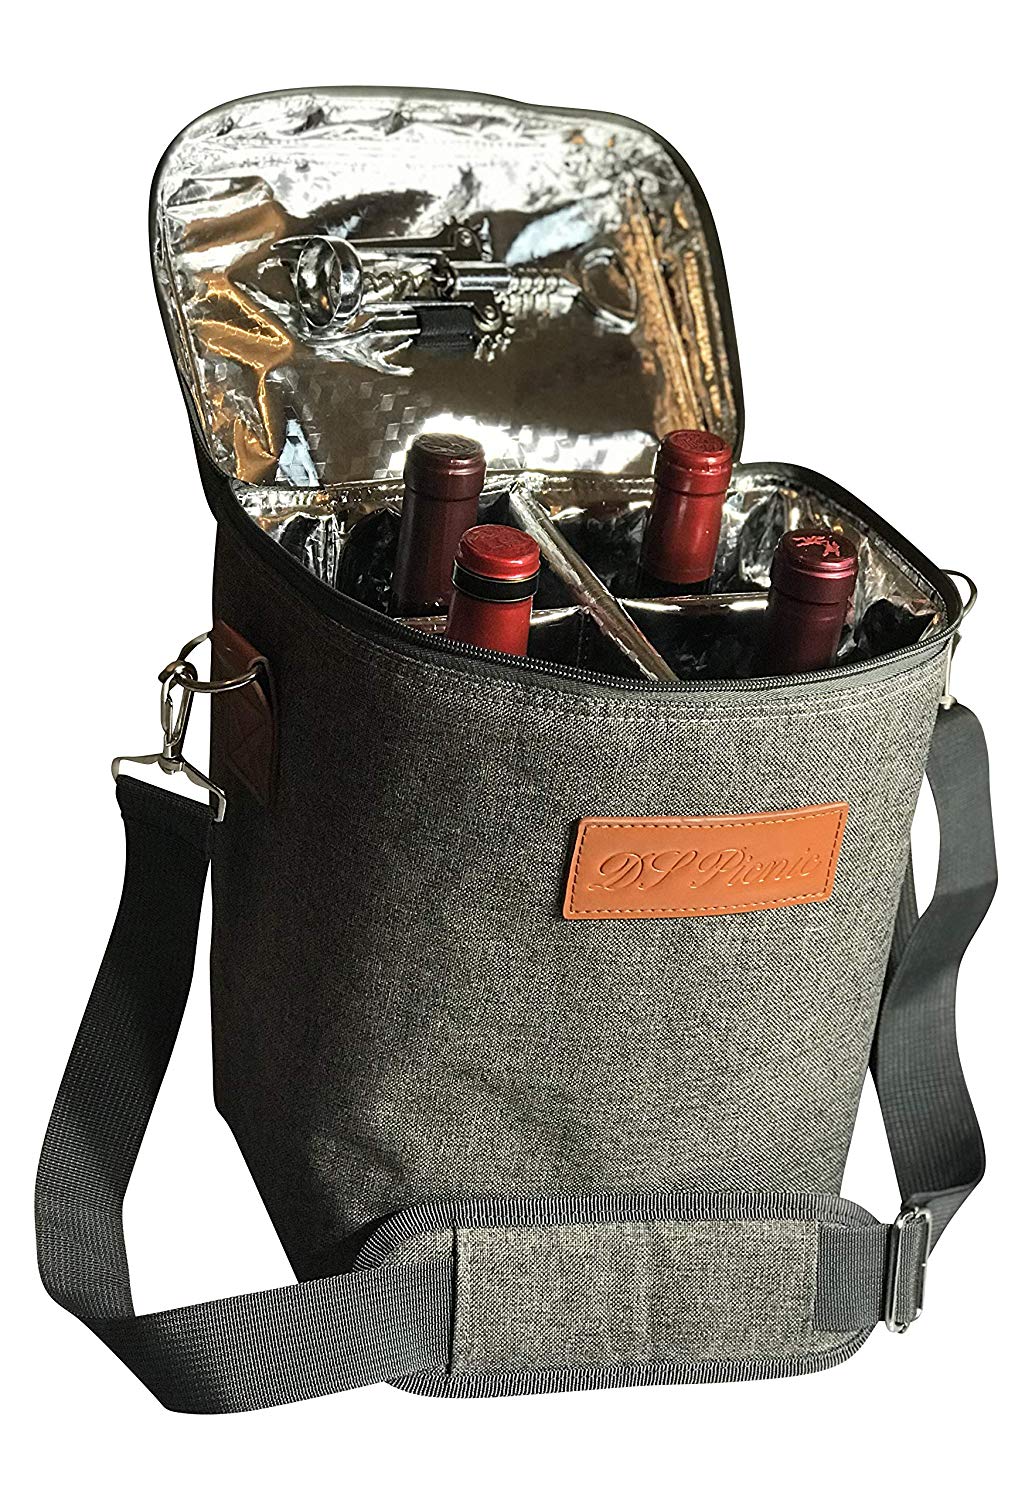 Insulated Wine Gift carrier Tote - Travel Padded 2 Bottle Wine/Champagne  Cooler Bag with Handle and Adjustable Shoulder Strap, Great Wine Lover  Gift